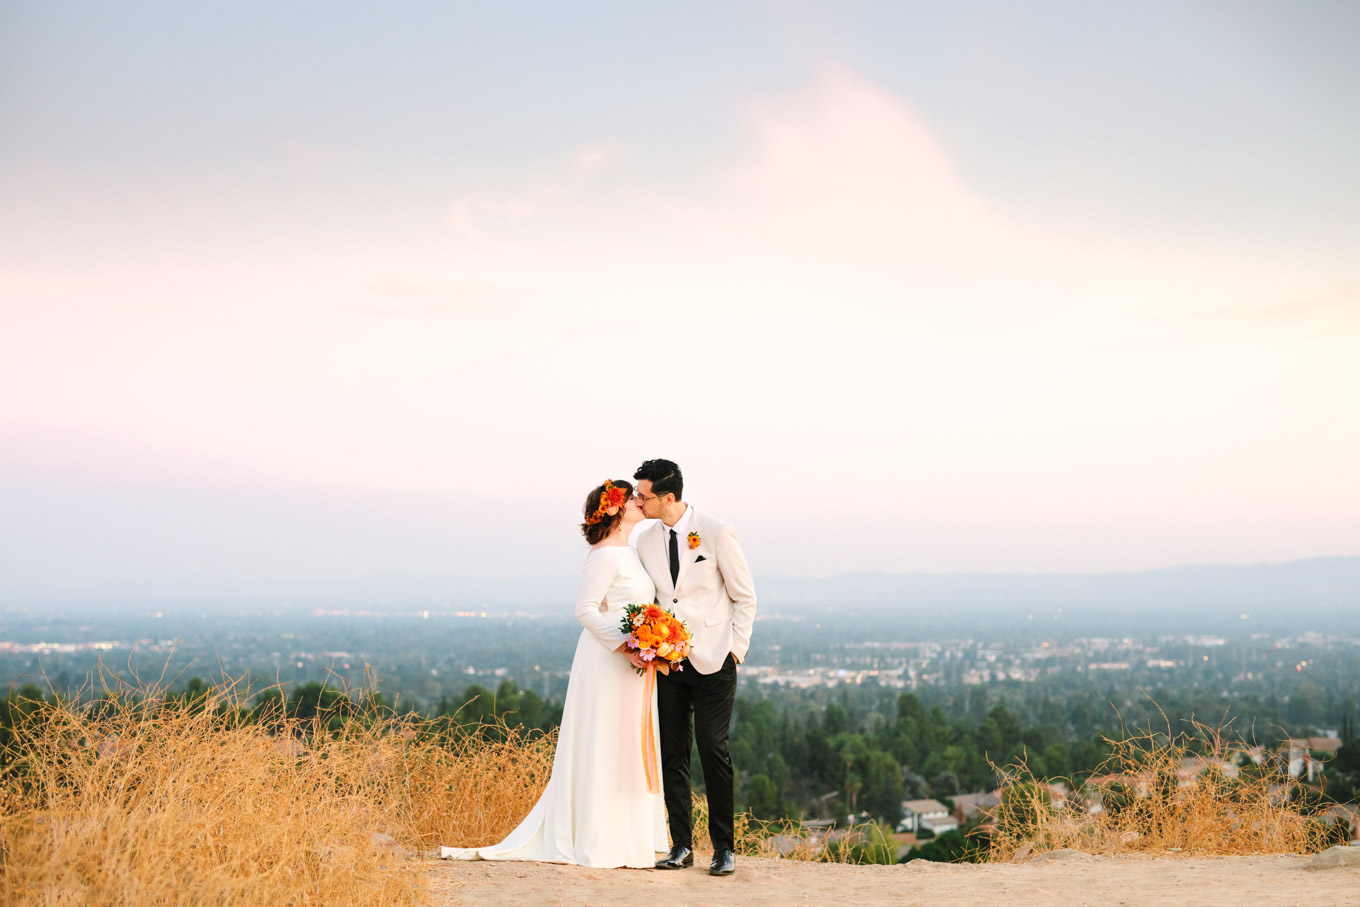 Bride and groom share a kiss with incredible views. | Vibrant backyard micro wedding featured on Green Wedding Shoes | Colorful LA wedding photography | #losangeleswedding #backyardwedding #microwedding #laweddingphotographer Source: Mary Costa Photography | Los Angeles